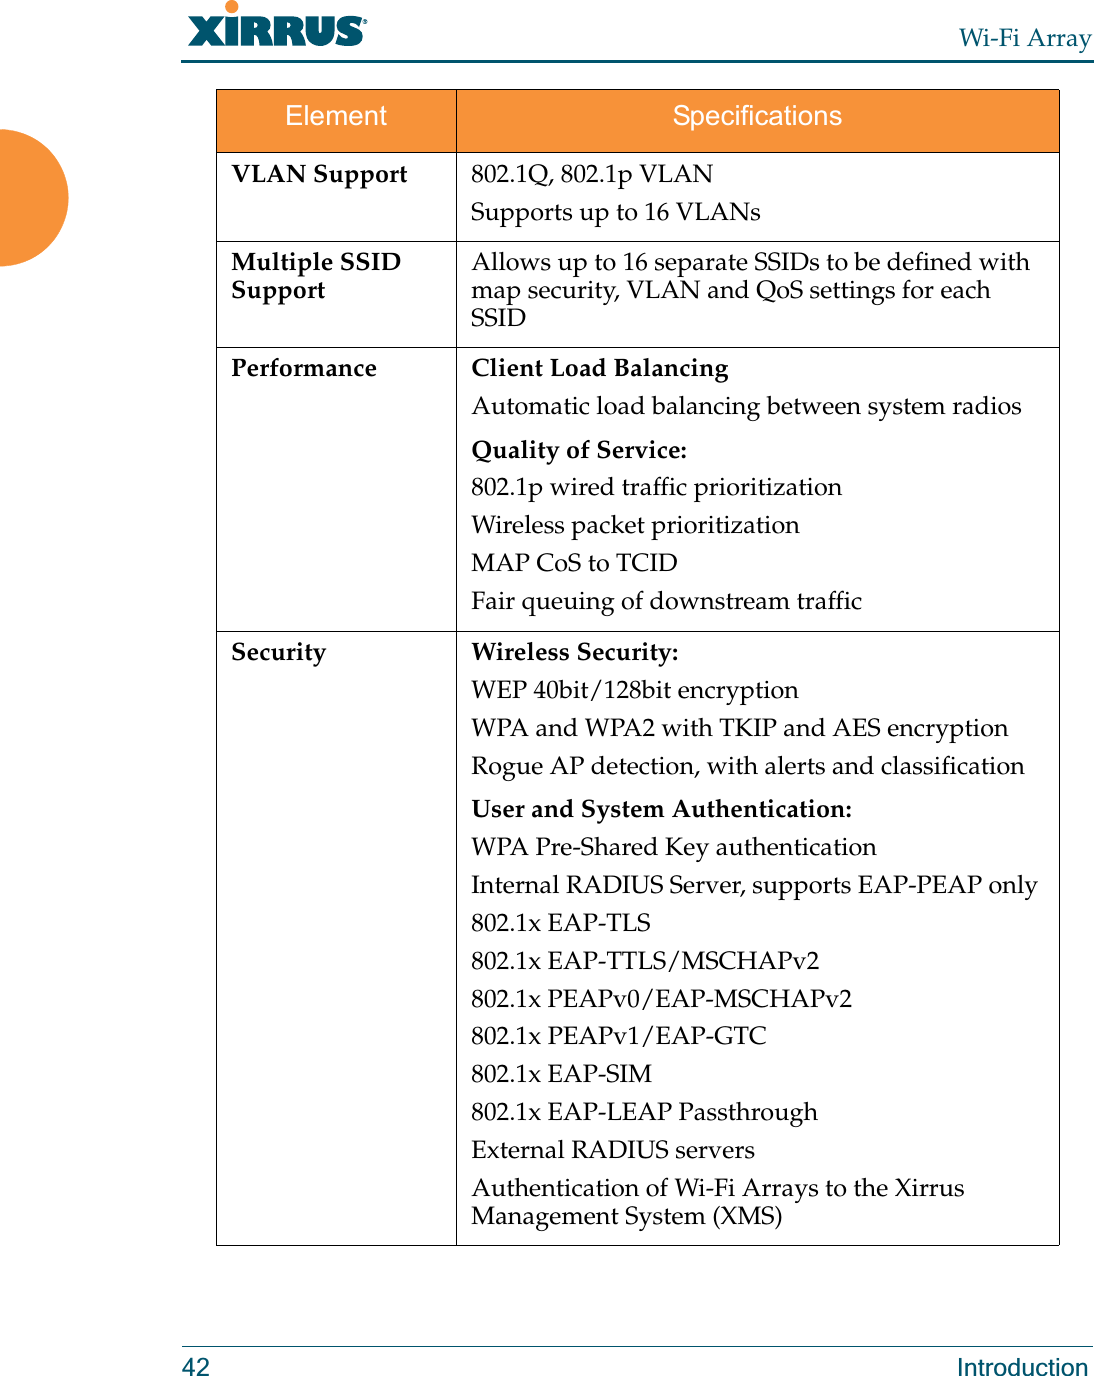 Wi-Fi Array42 IntroductionVLAN Support 802.1Q, 802.1p VLANSupports up to 16 VLANsMultiple SSID SupportAllows up to 16 separate SSIDs to be defined with map security, VLAN and QoS settings for each SSIDPerformance Client Load BalancingAutomatic load balancing between system radiosQuality of Service:802.1p wired traffic prioritizationWireless packet prioritizationMAP CoS to TCIDFair queuing of downstream trafficSecurity Wireless Security:WEP 40bit/128bit encryptionWPA and WPA2 with TKIP and AES encryptionRogue AP detection, with alerts and classificationUser and System Authentication:WPA Pre-Shared Key authenticationInternal RADIUS Server, supports EAP-PEAP only802.1x EAP-TLS802.1x EAP-TTLS/MSCHAPv2802.1x PEAPv0/EAP-MSCHAPv2802.1x PEAPv1/EAP-GTC802.1x EAP-SIM802.1x EAP-LEAP Passthrough External RADIUS serversAuthentication of Wi-Fi Arrays to the Xirrus Management System (XMS)Element Specifications